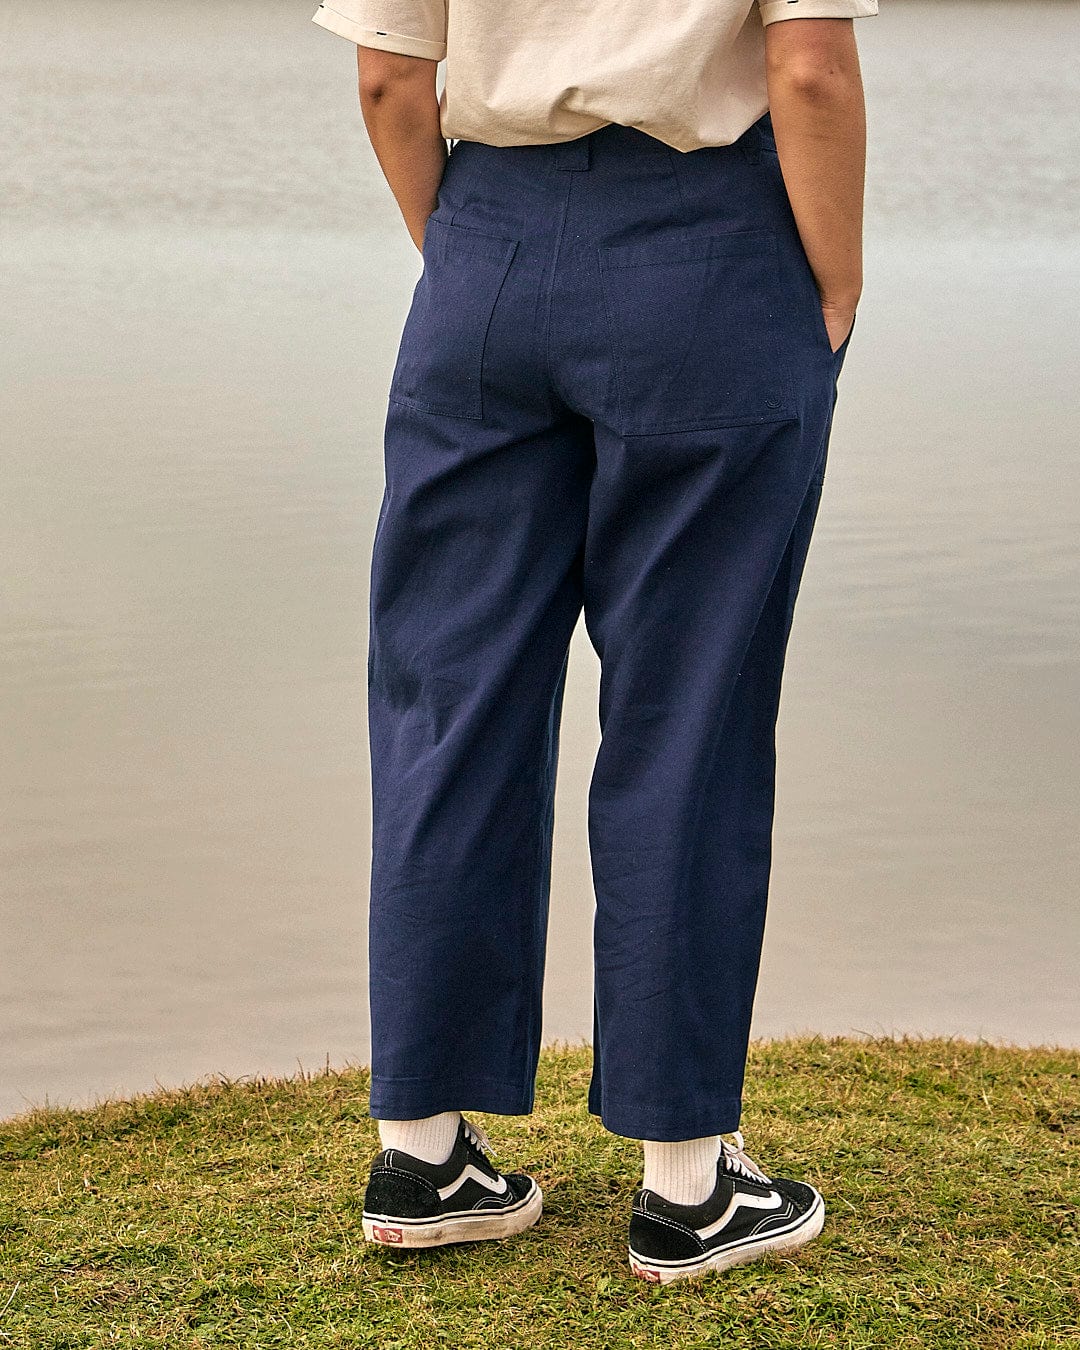 A woman is standing next to a body of water wearing Saltrock's Hilda - Womens Canvas Trouser in Dark Blue.